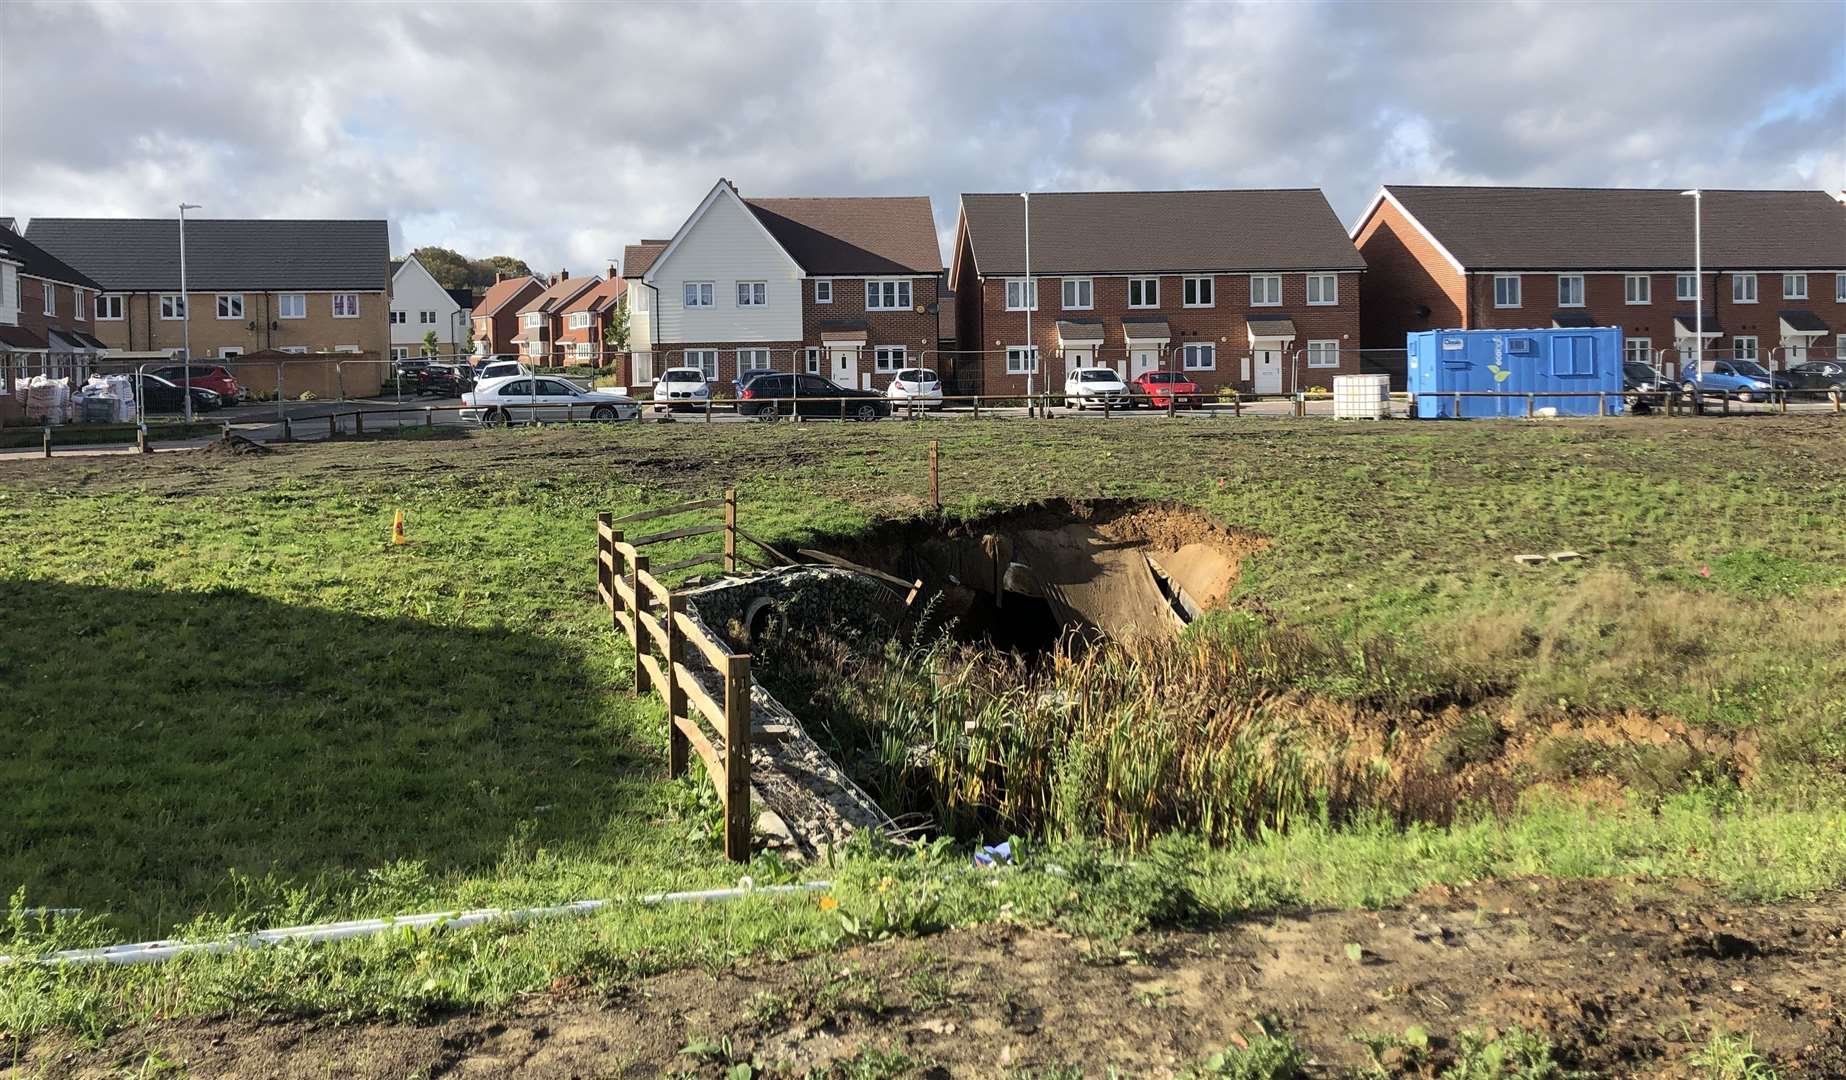 A sinkhole has opened up in the Orchard Fields development in Hermitage Lane